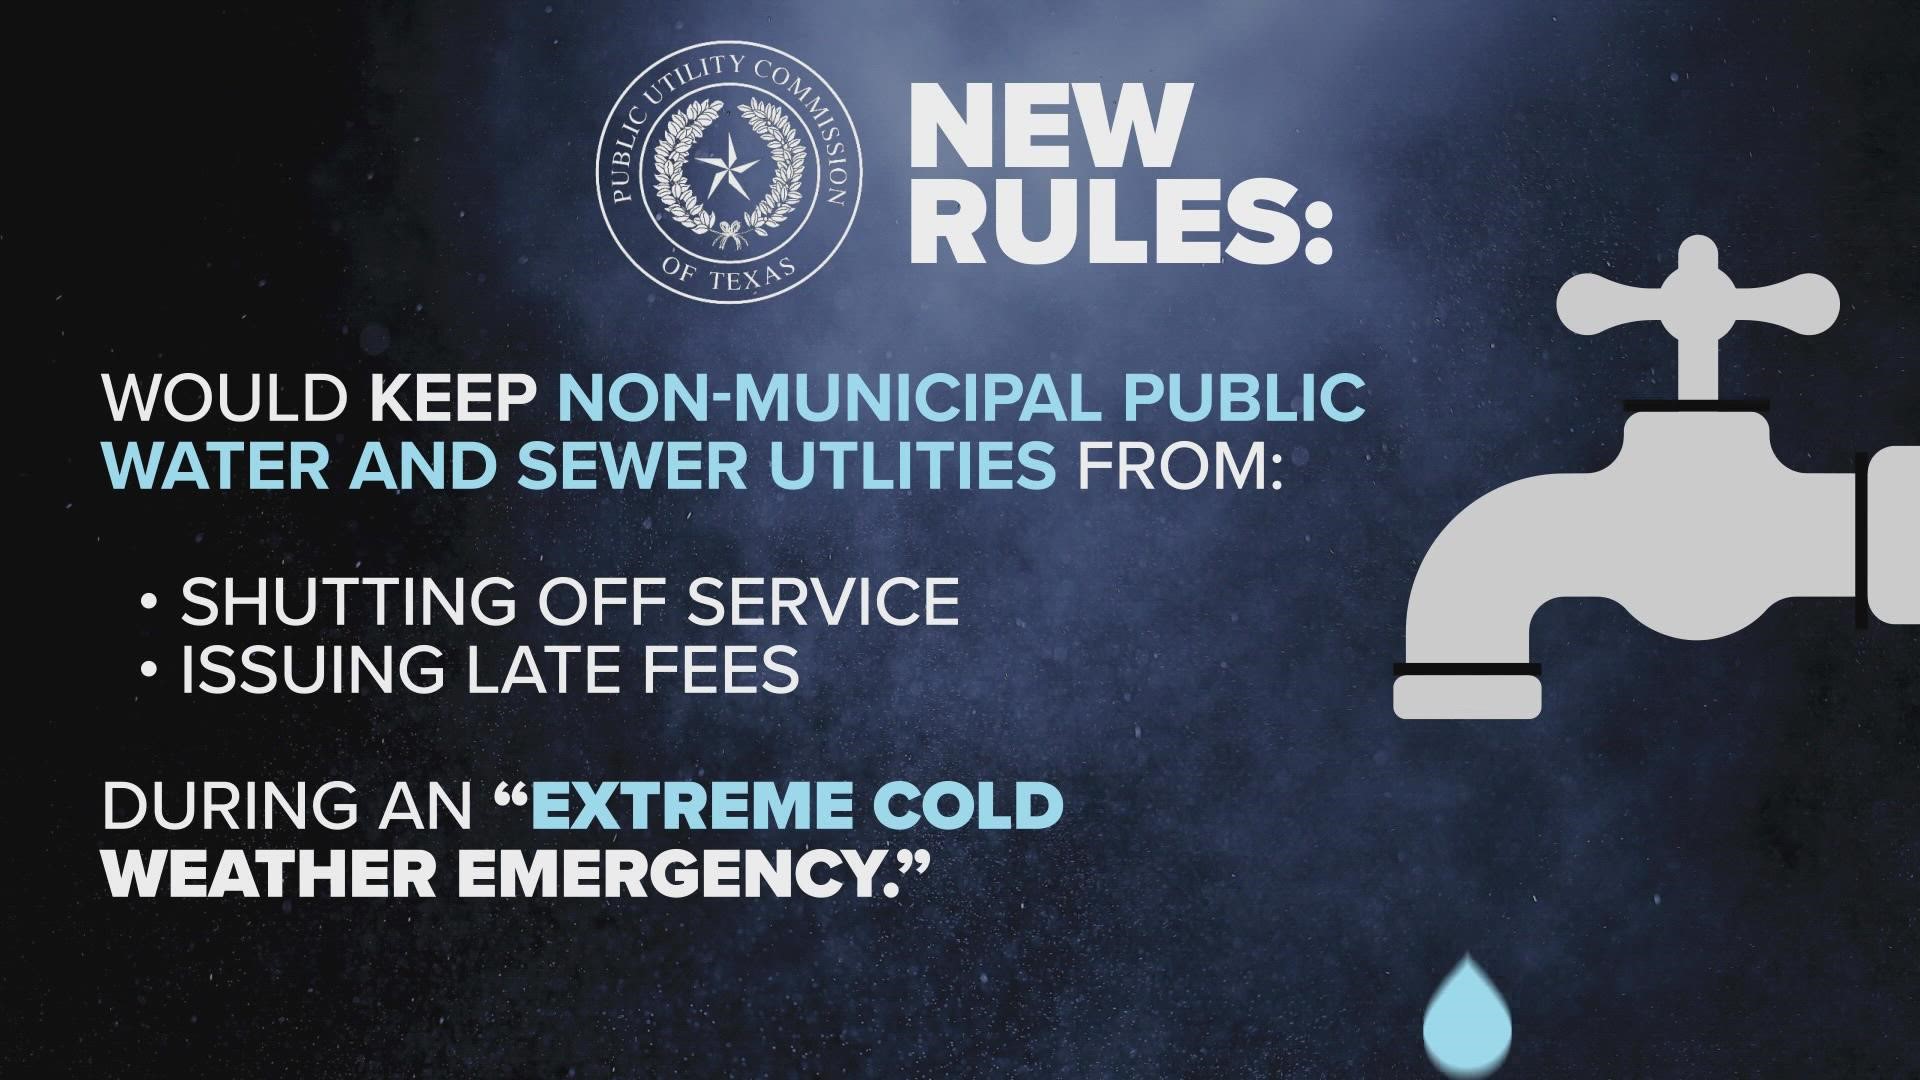 The rule prohibits non-municipal public water and sewer disconnections during extreme cold weather emergencies.